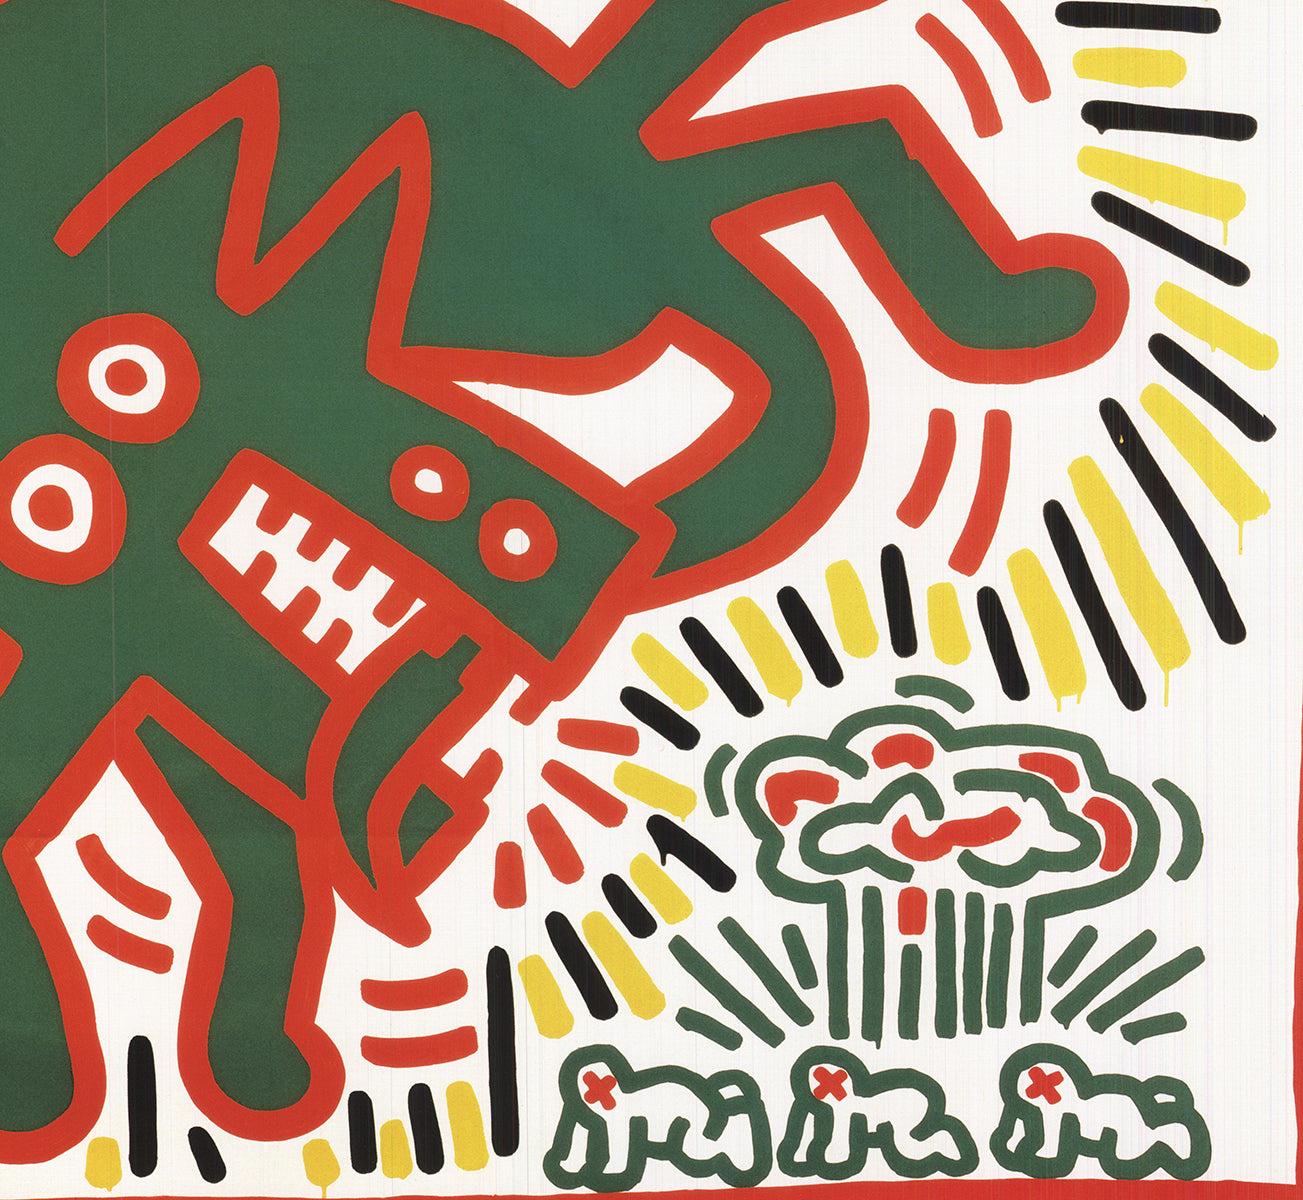 Offsetlithographie „Ohne Titel“, Keith Haring, 1983“, Offsetlithographie 2008 im Angebot 3